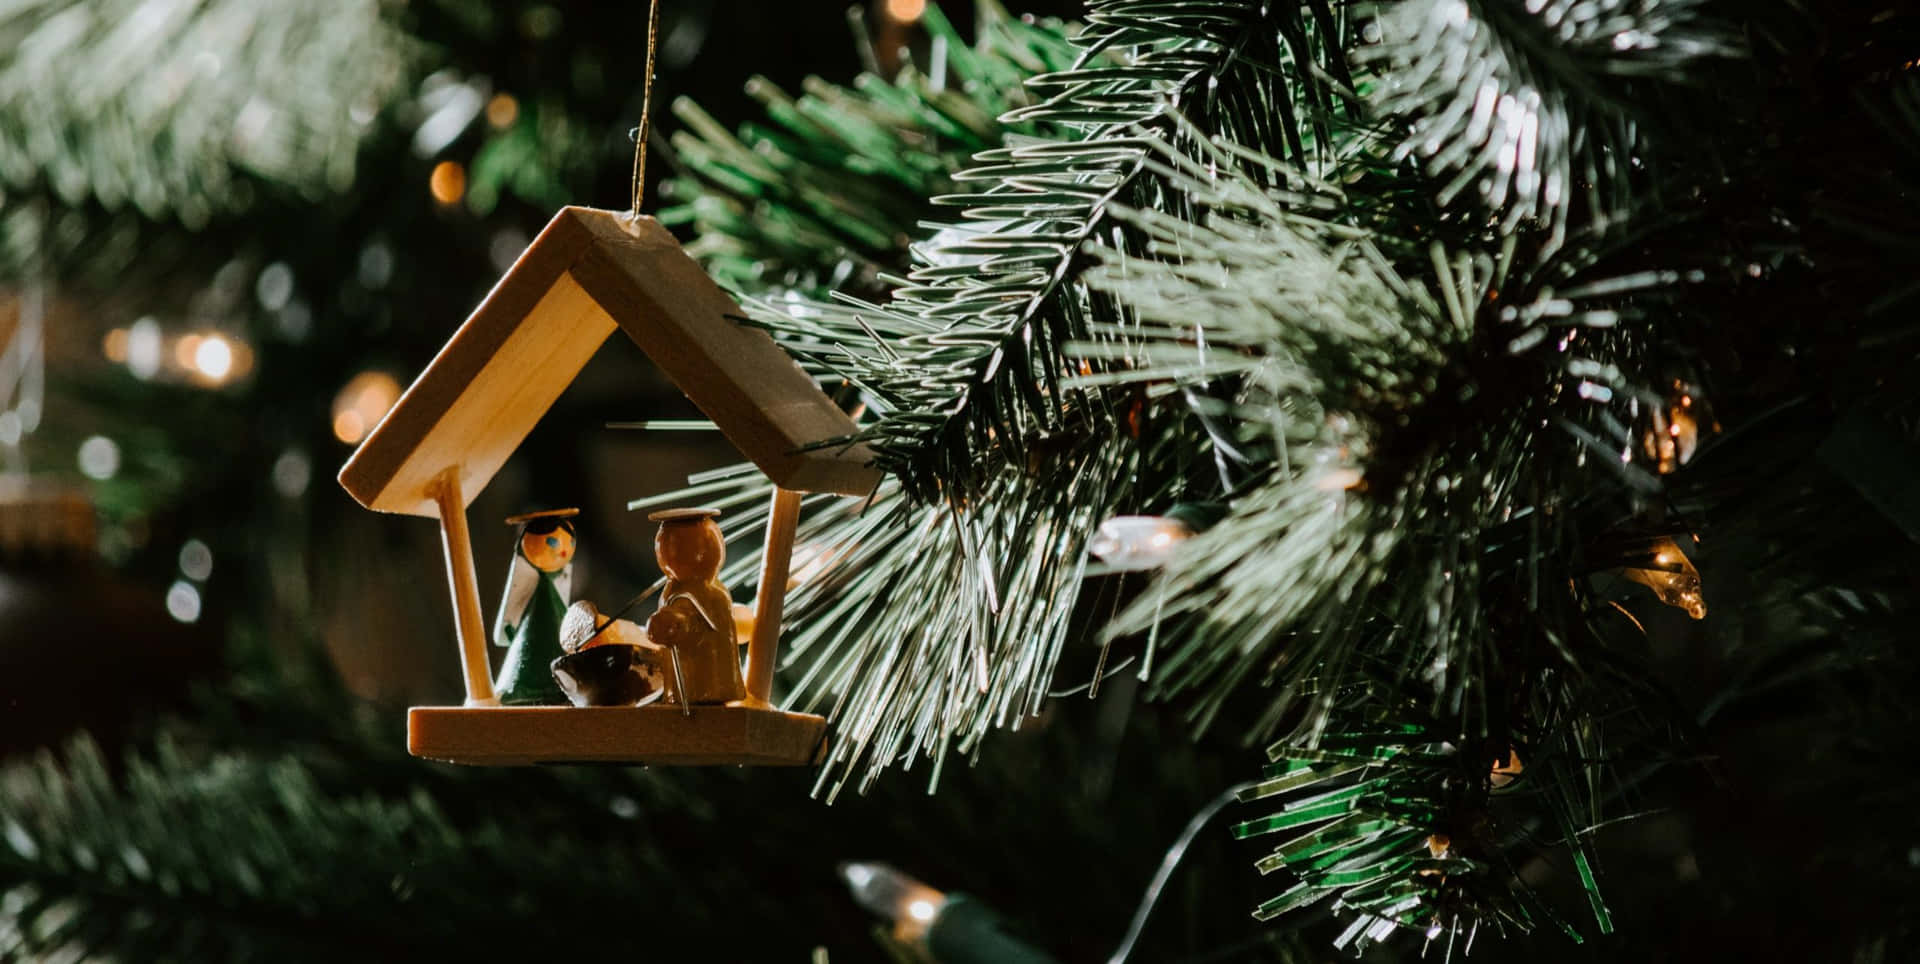 A Wooden House Hanging On A Christmas Tree